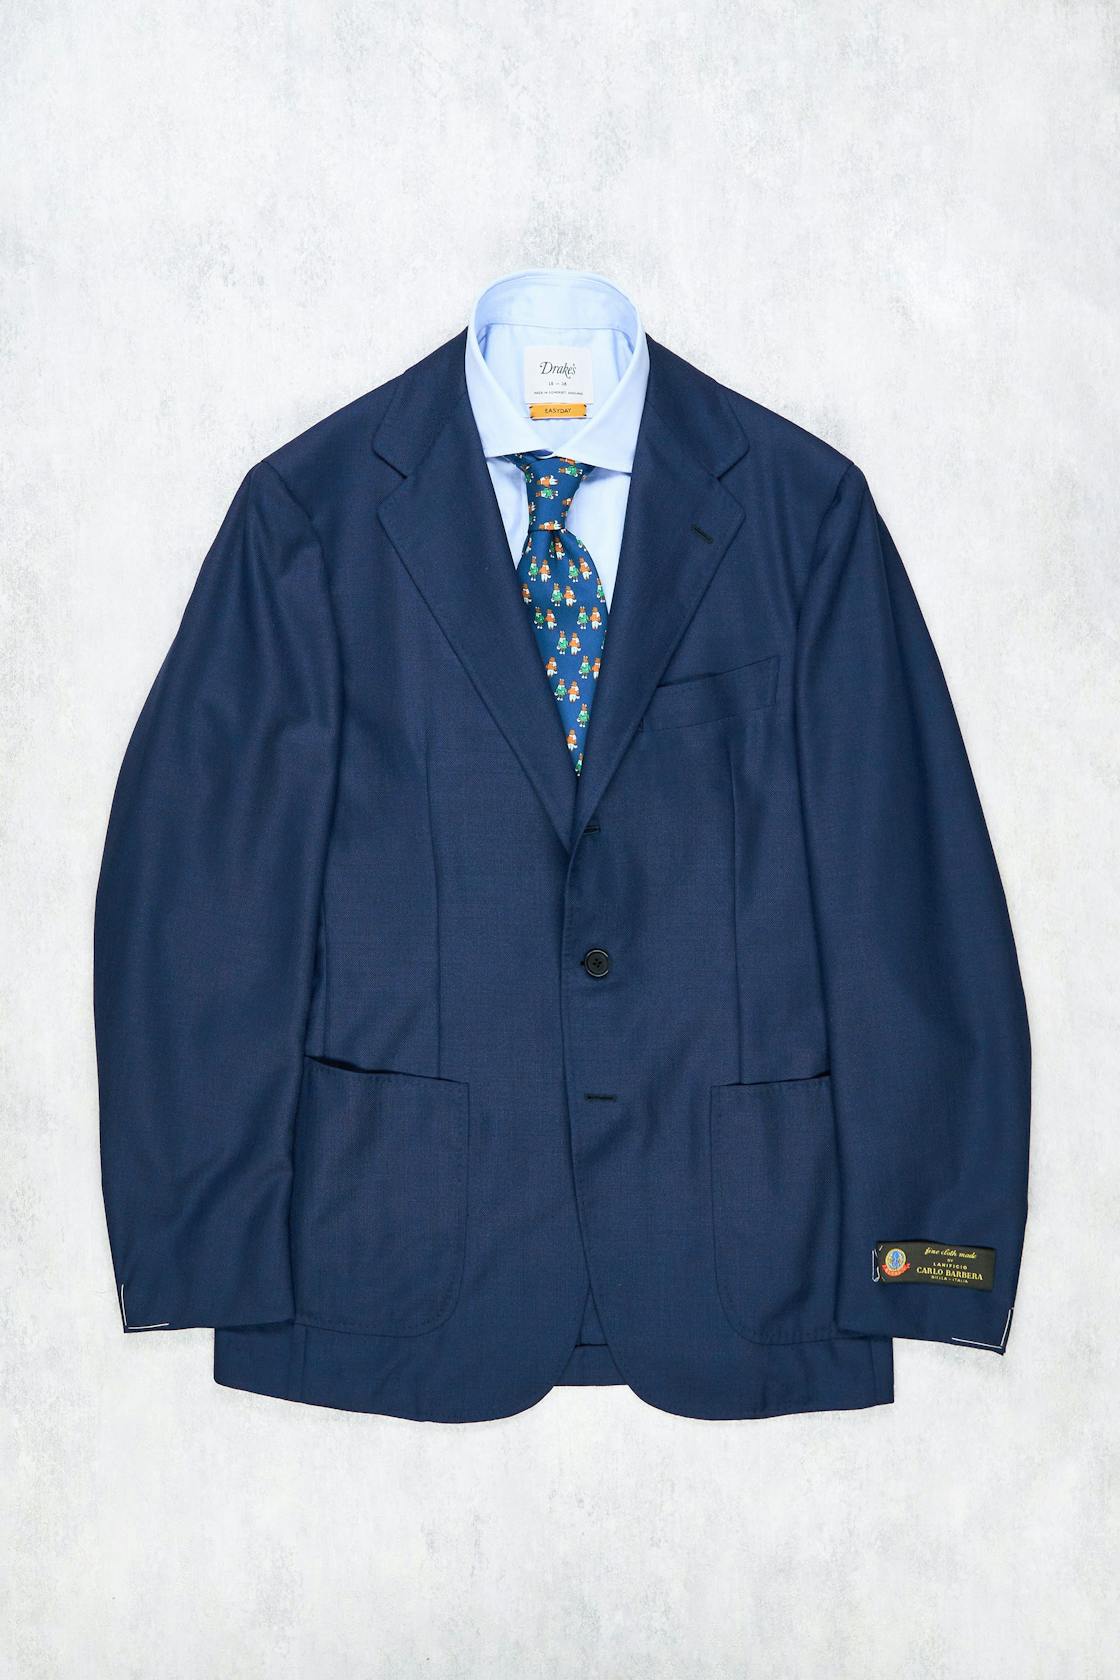 The Armoury by Ring Jacket Model 3 Blue Wool/Silk Sport Coat